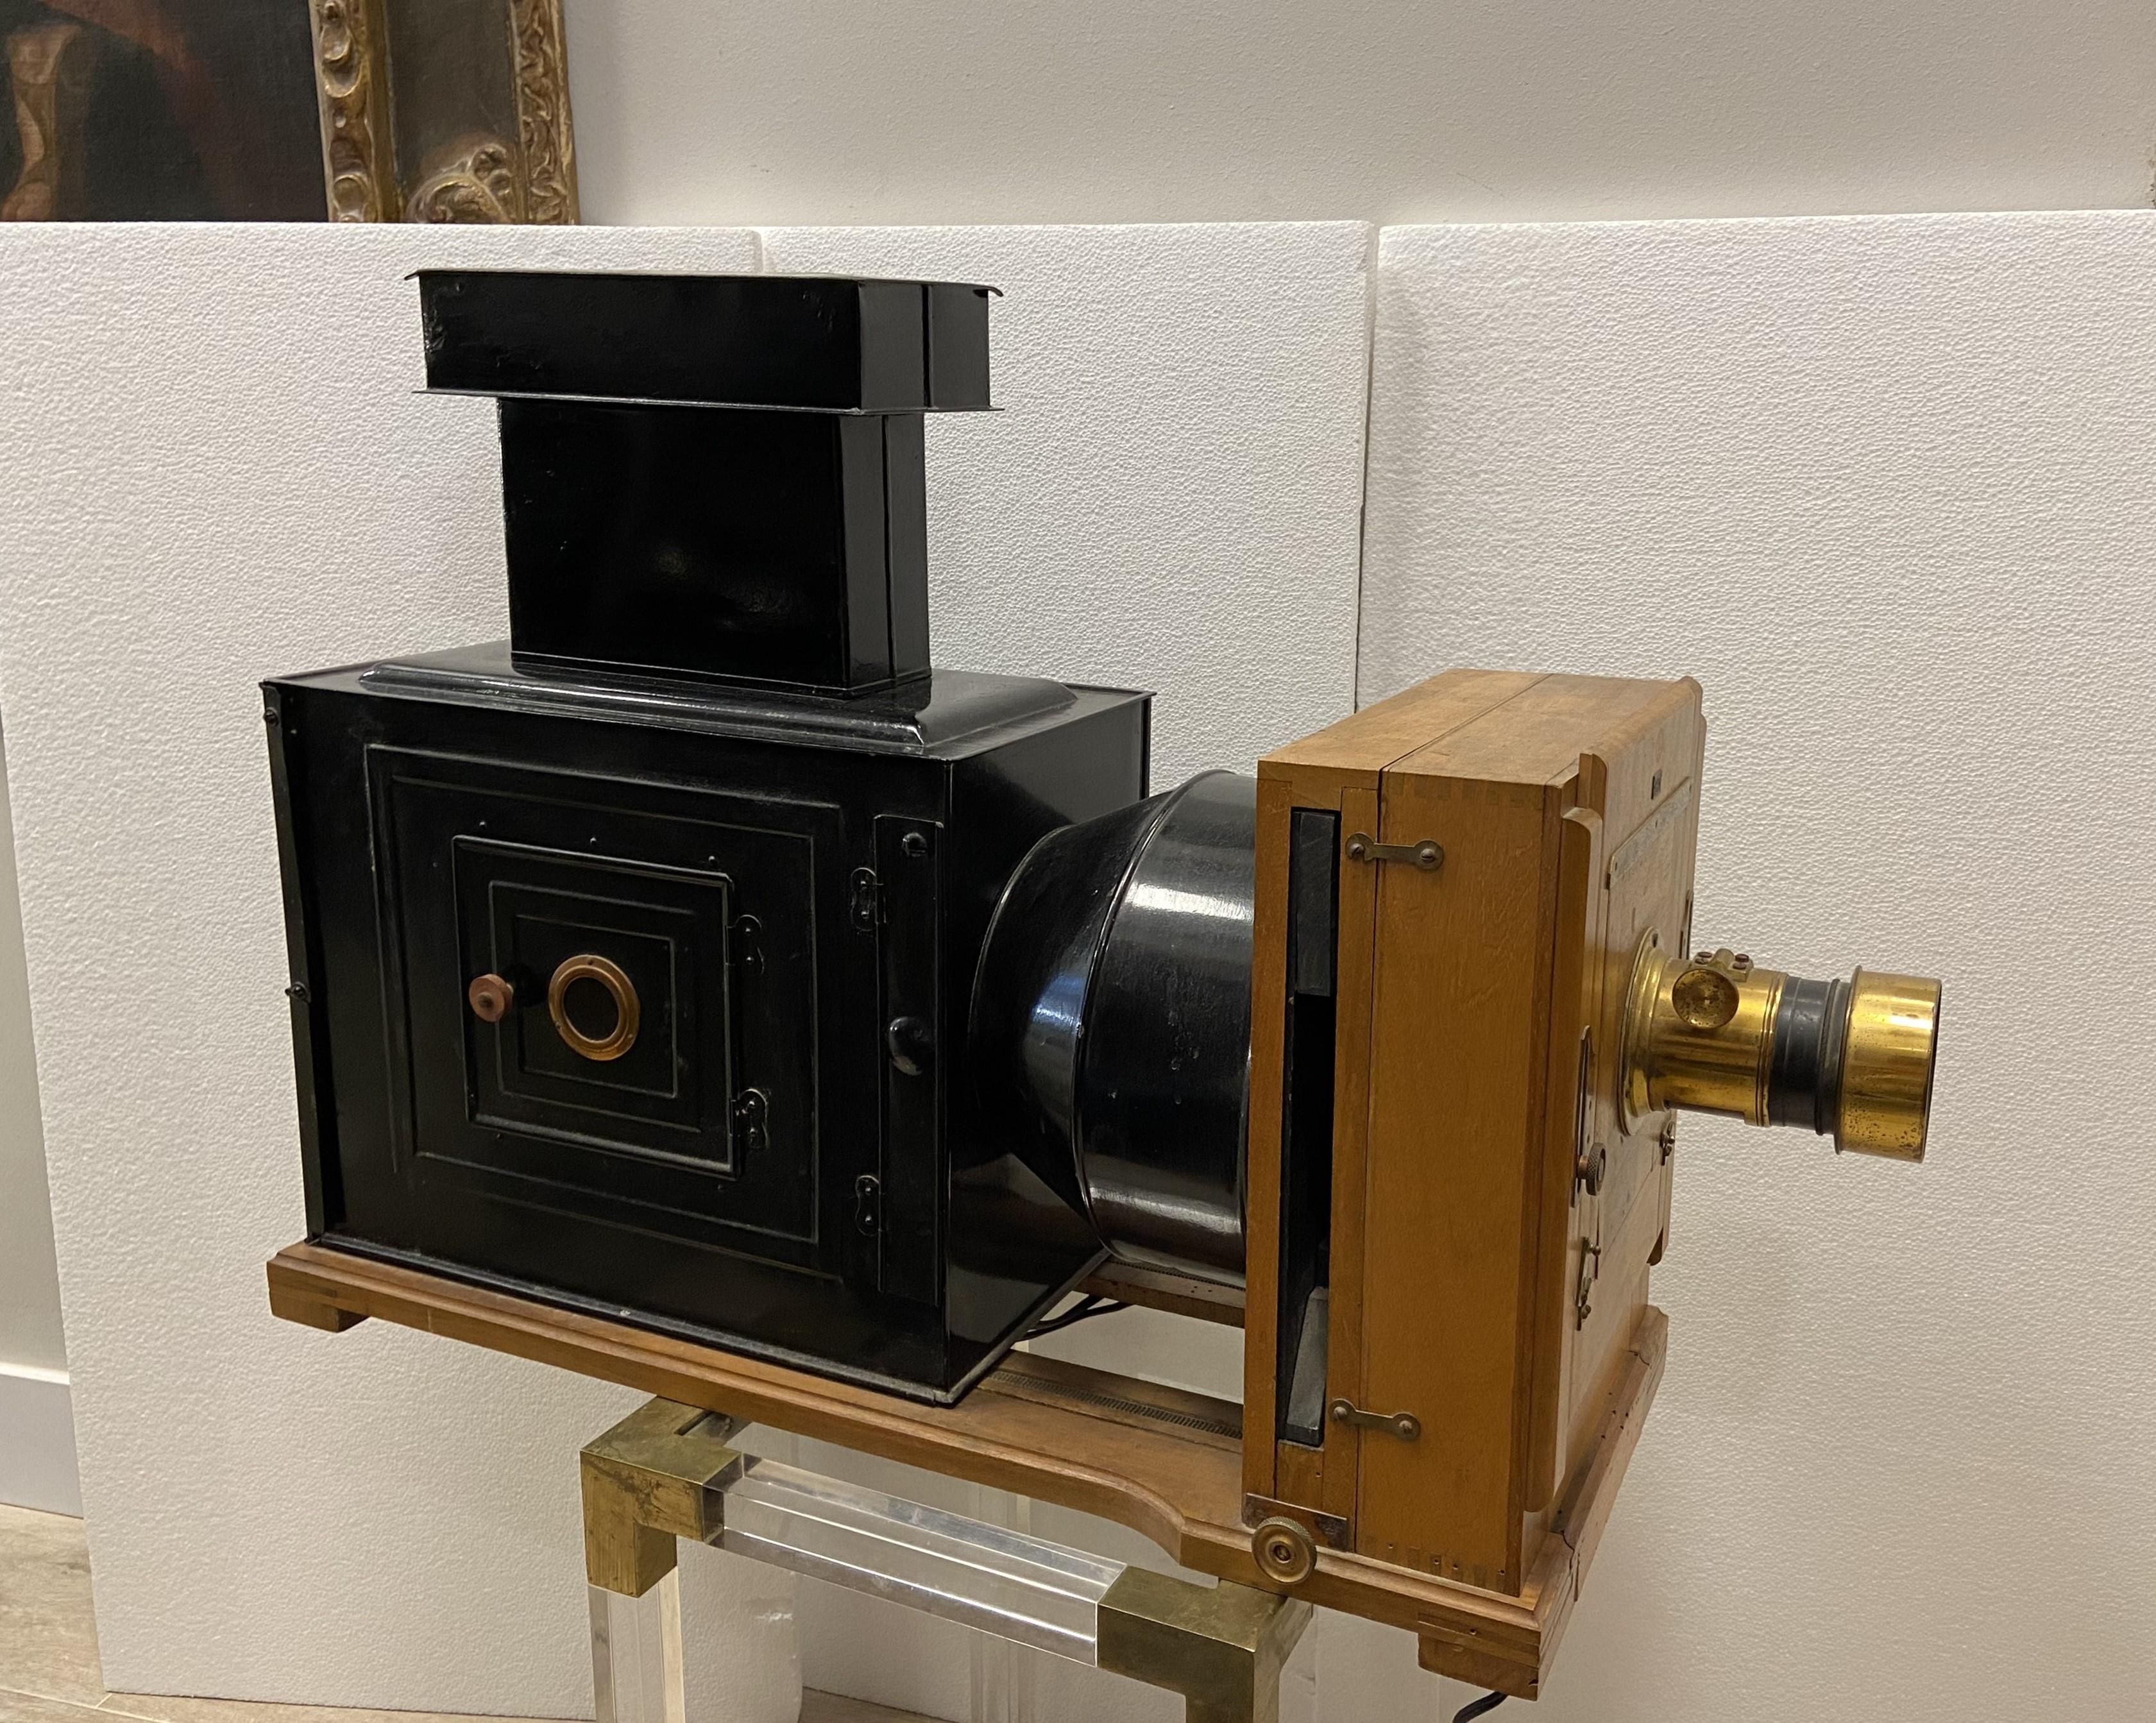 Outstanding and one of a kind folding magic lantern produced by the Unis France association in the first quarter of the 20th century. The function of this optical object is to project the illusion of movement. This is achieved through a simple